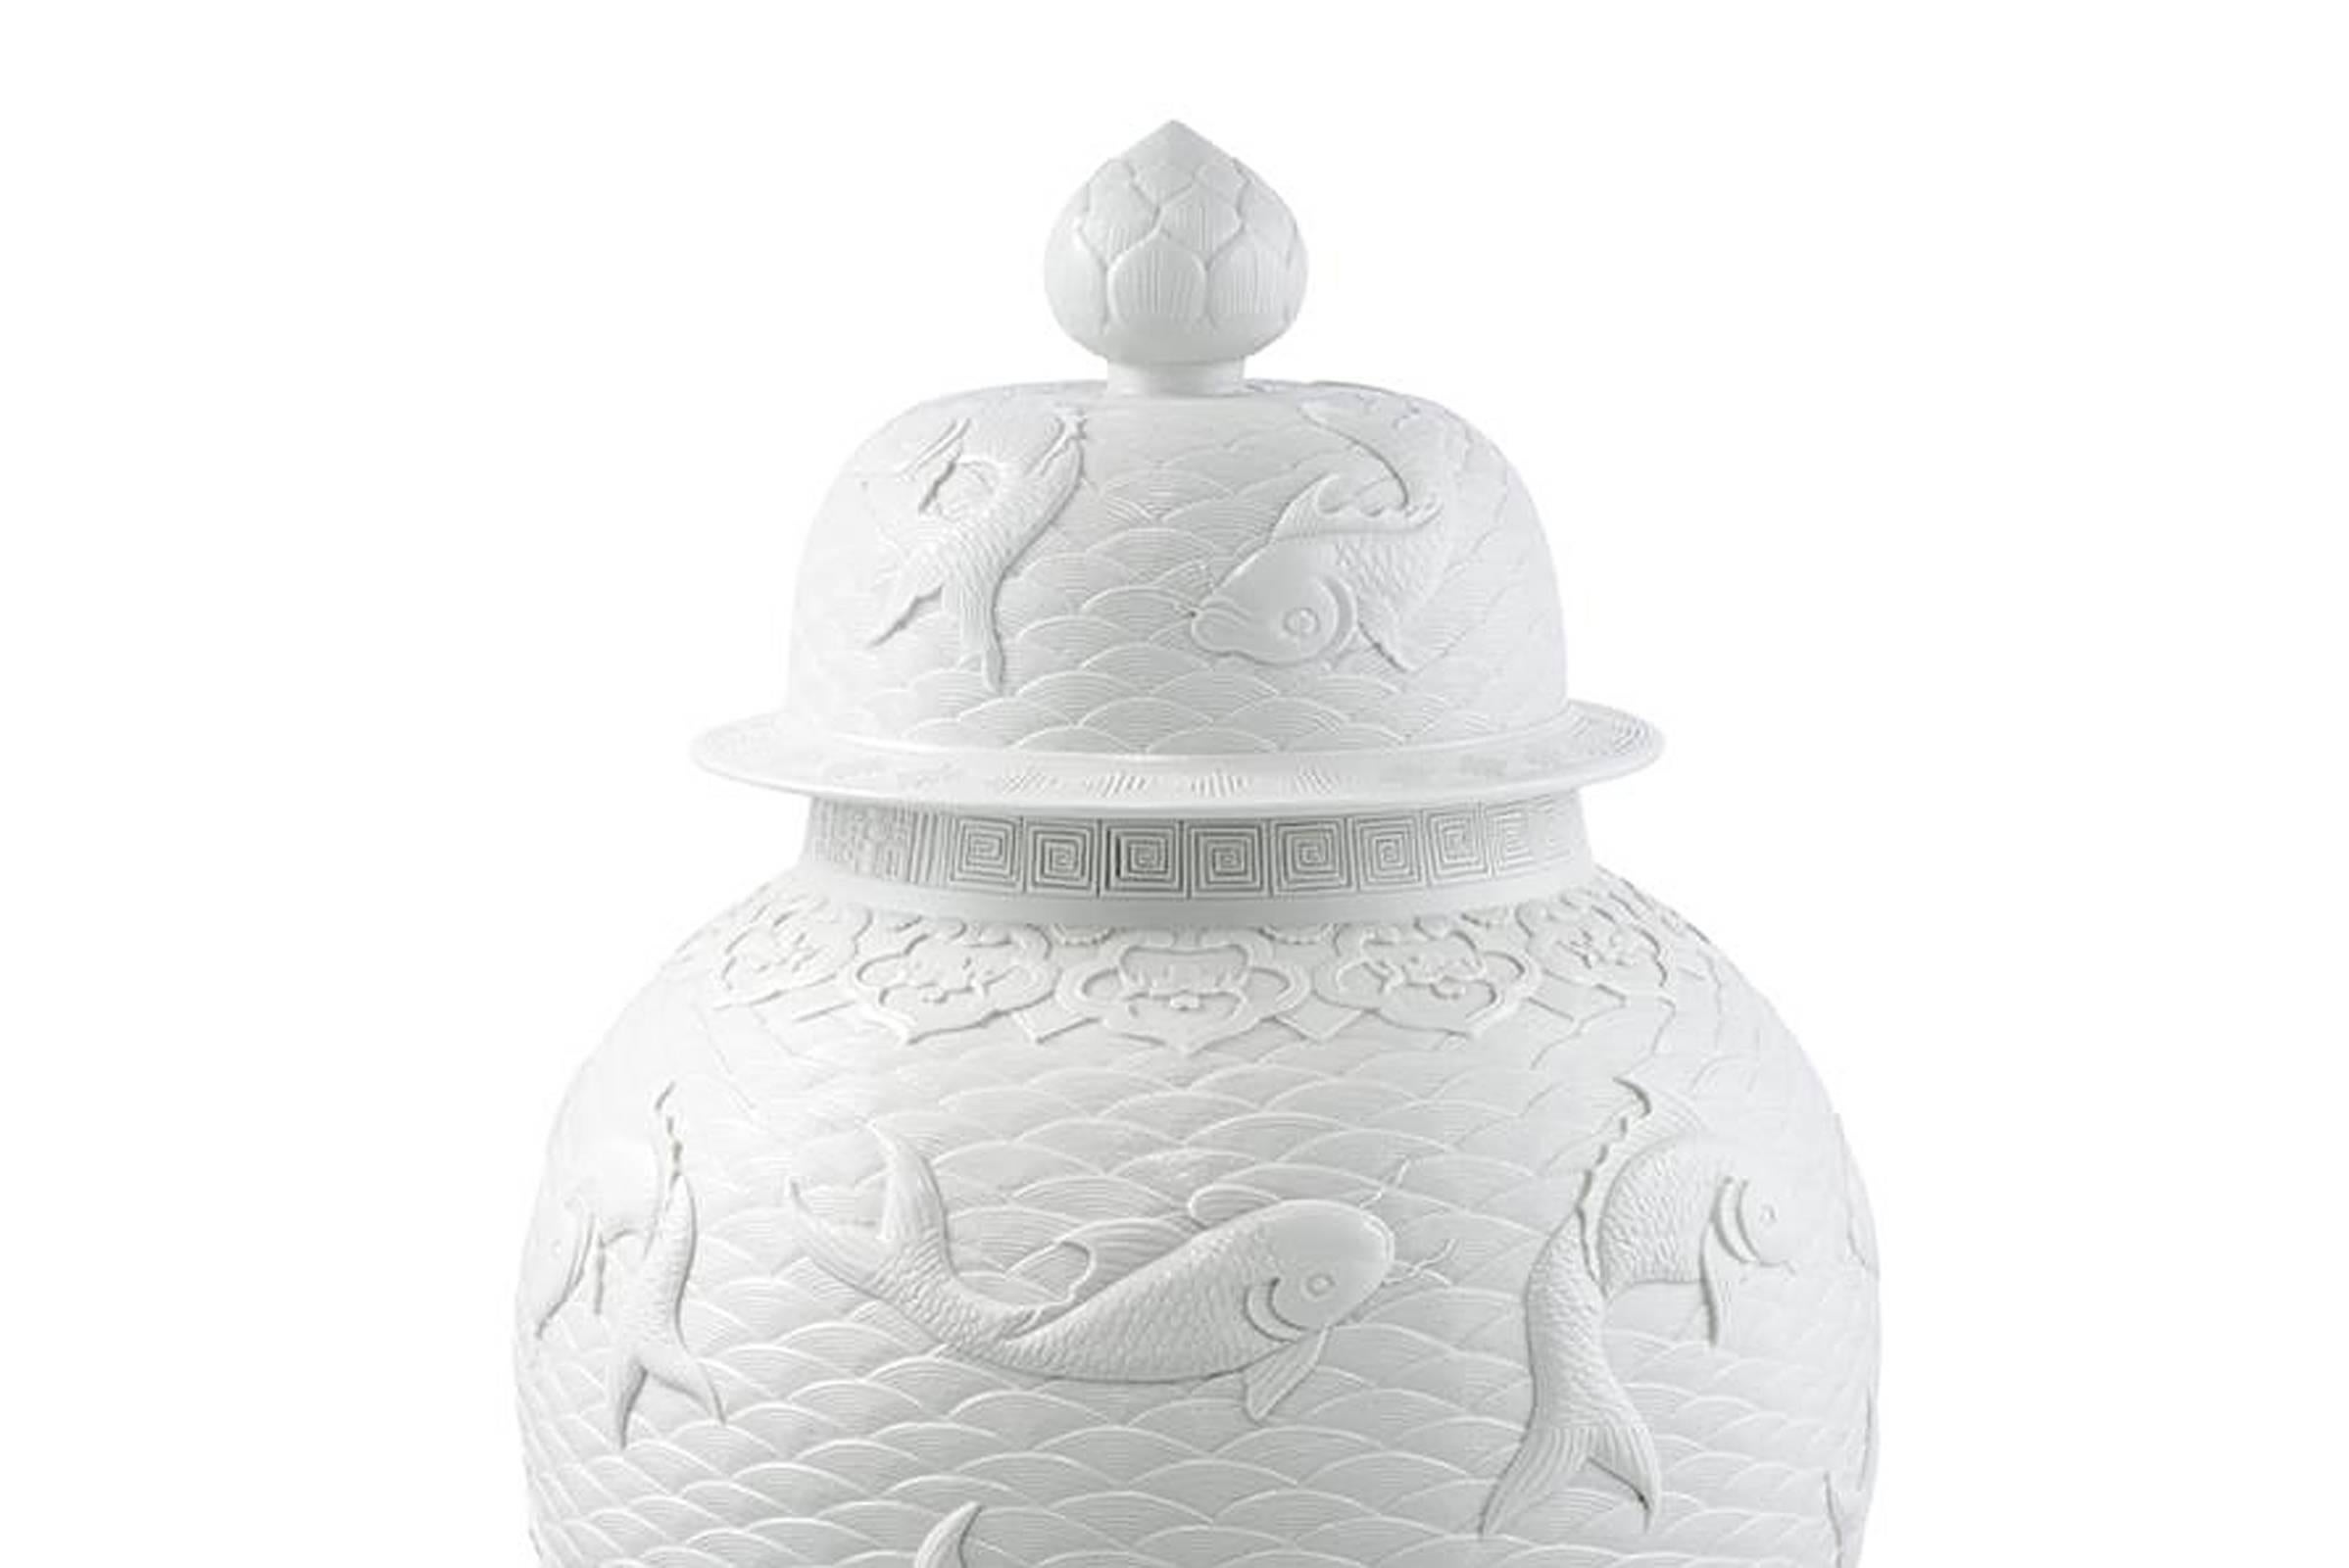 Vase Karps in white relief ceramic with
Japanese fishes and graphical details.
